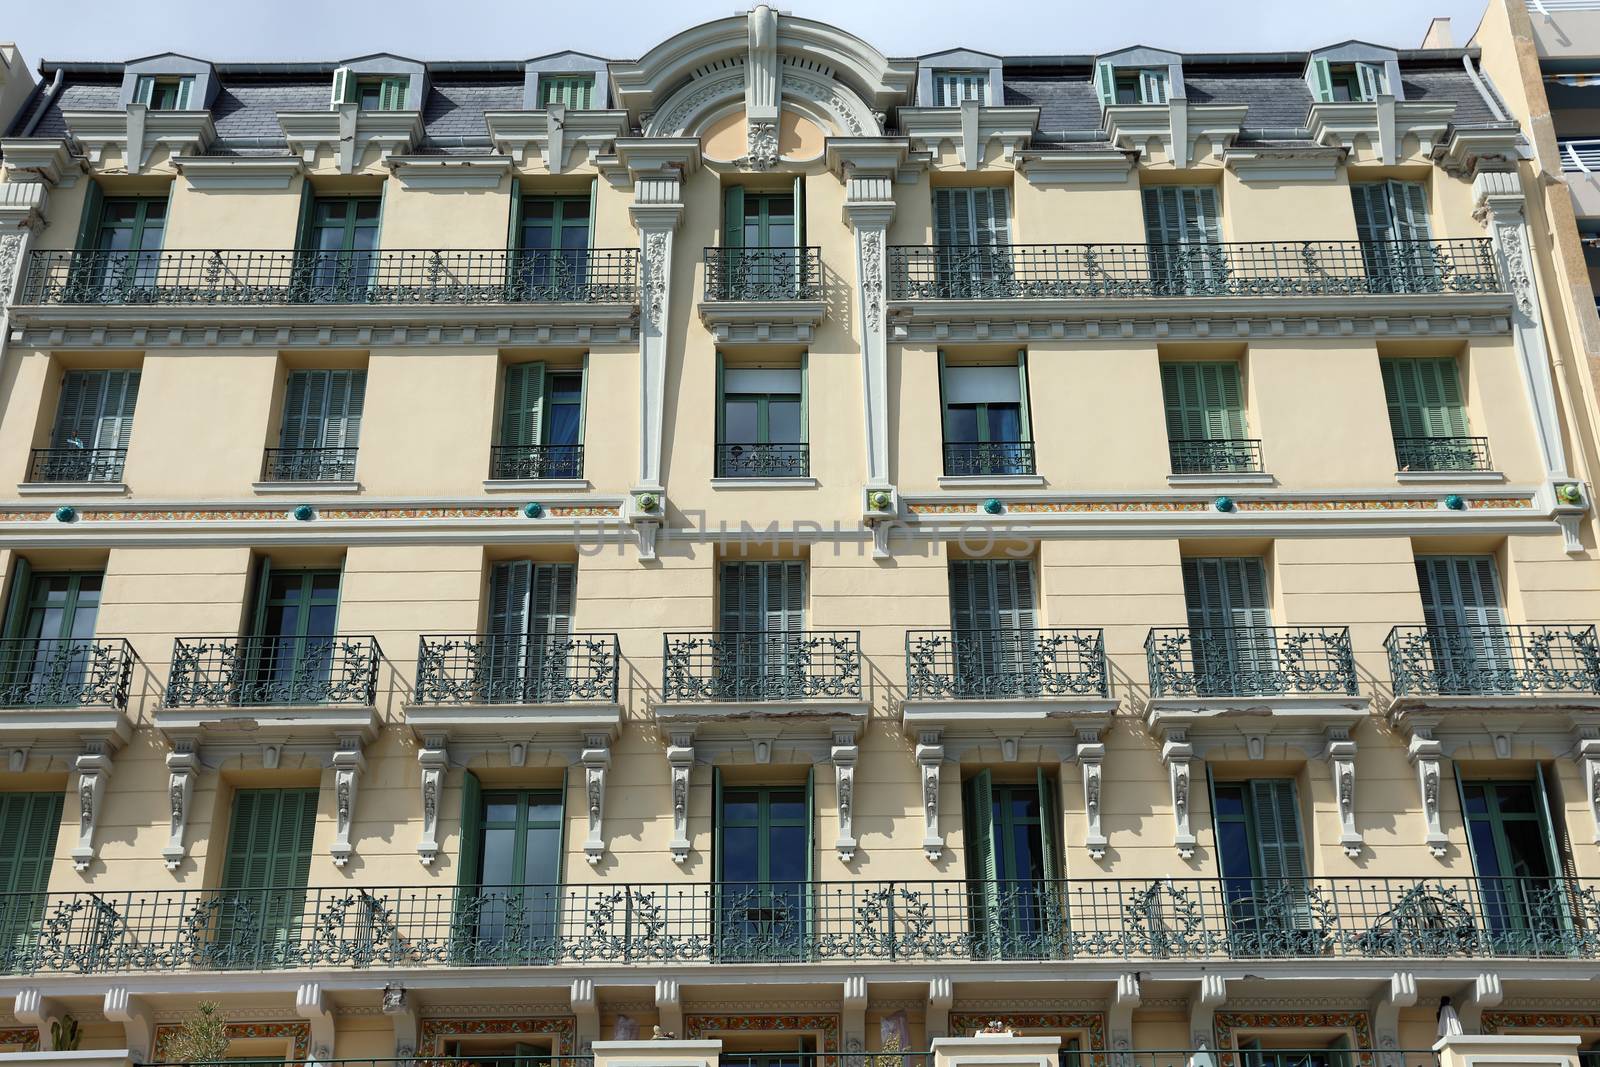 Facade of Traditional French Riviera Building by bensib